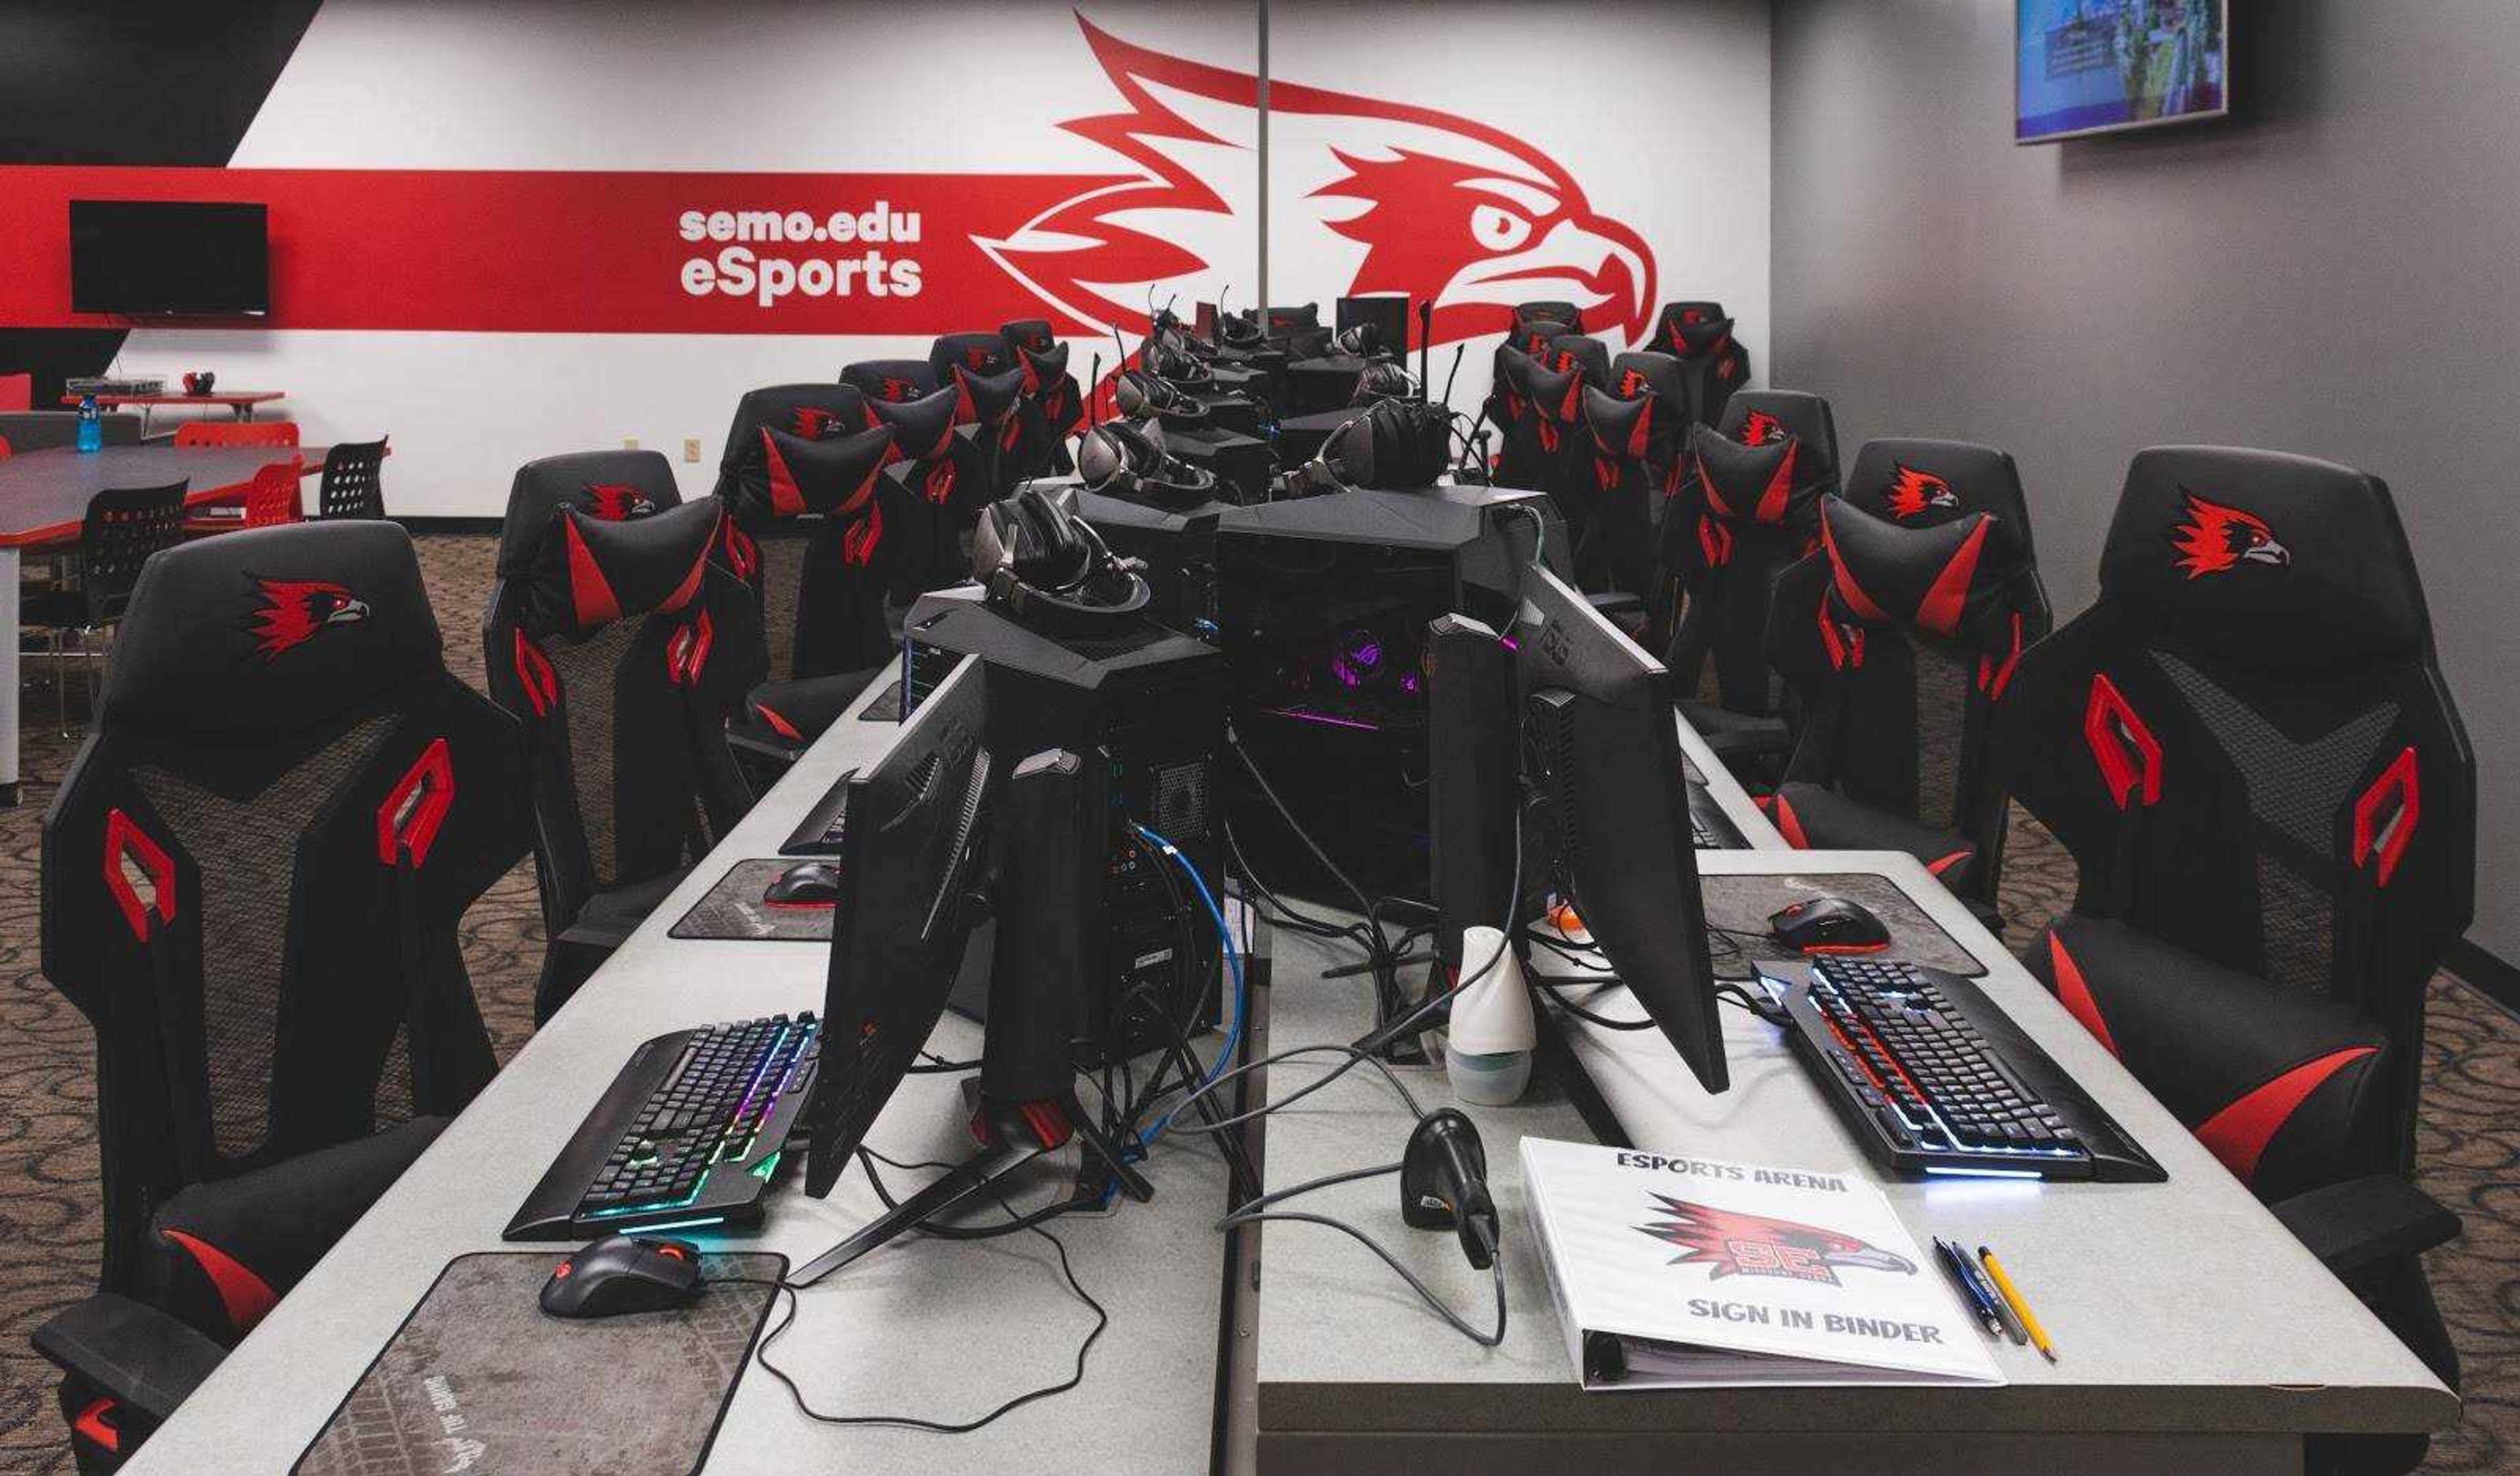 Tournaments foreshadow the future for Southeast eSports Club